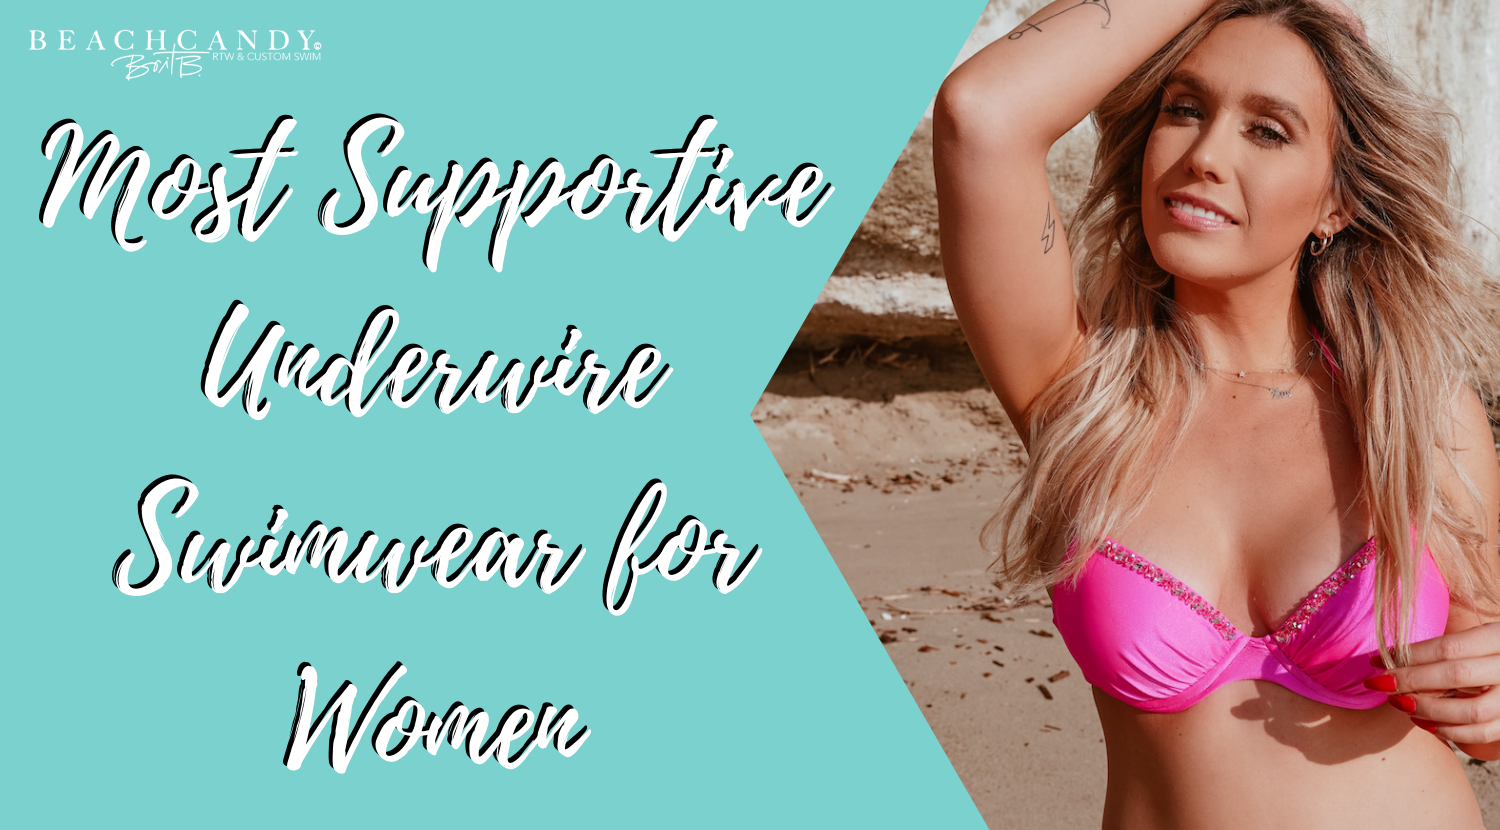 bathing suits with underwire support